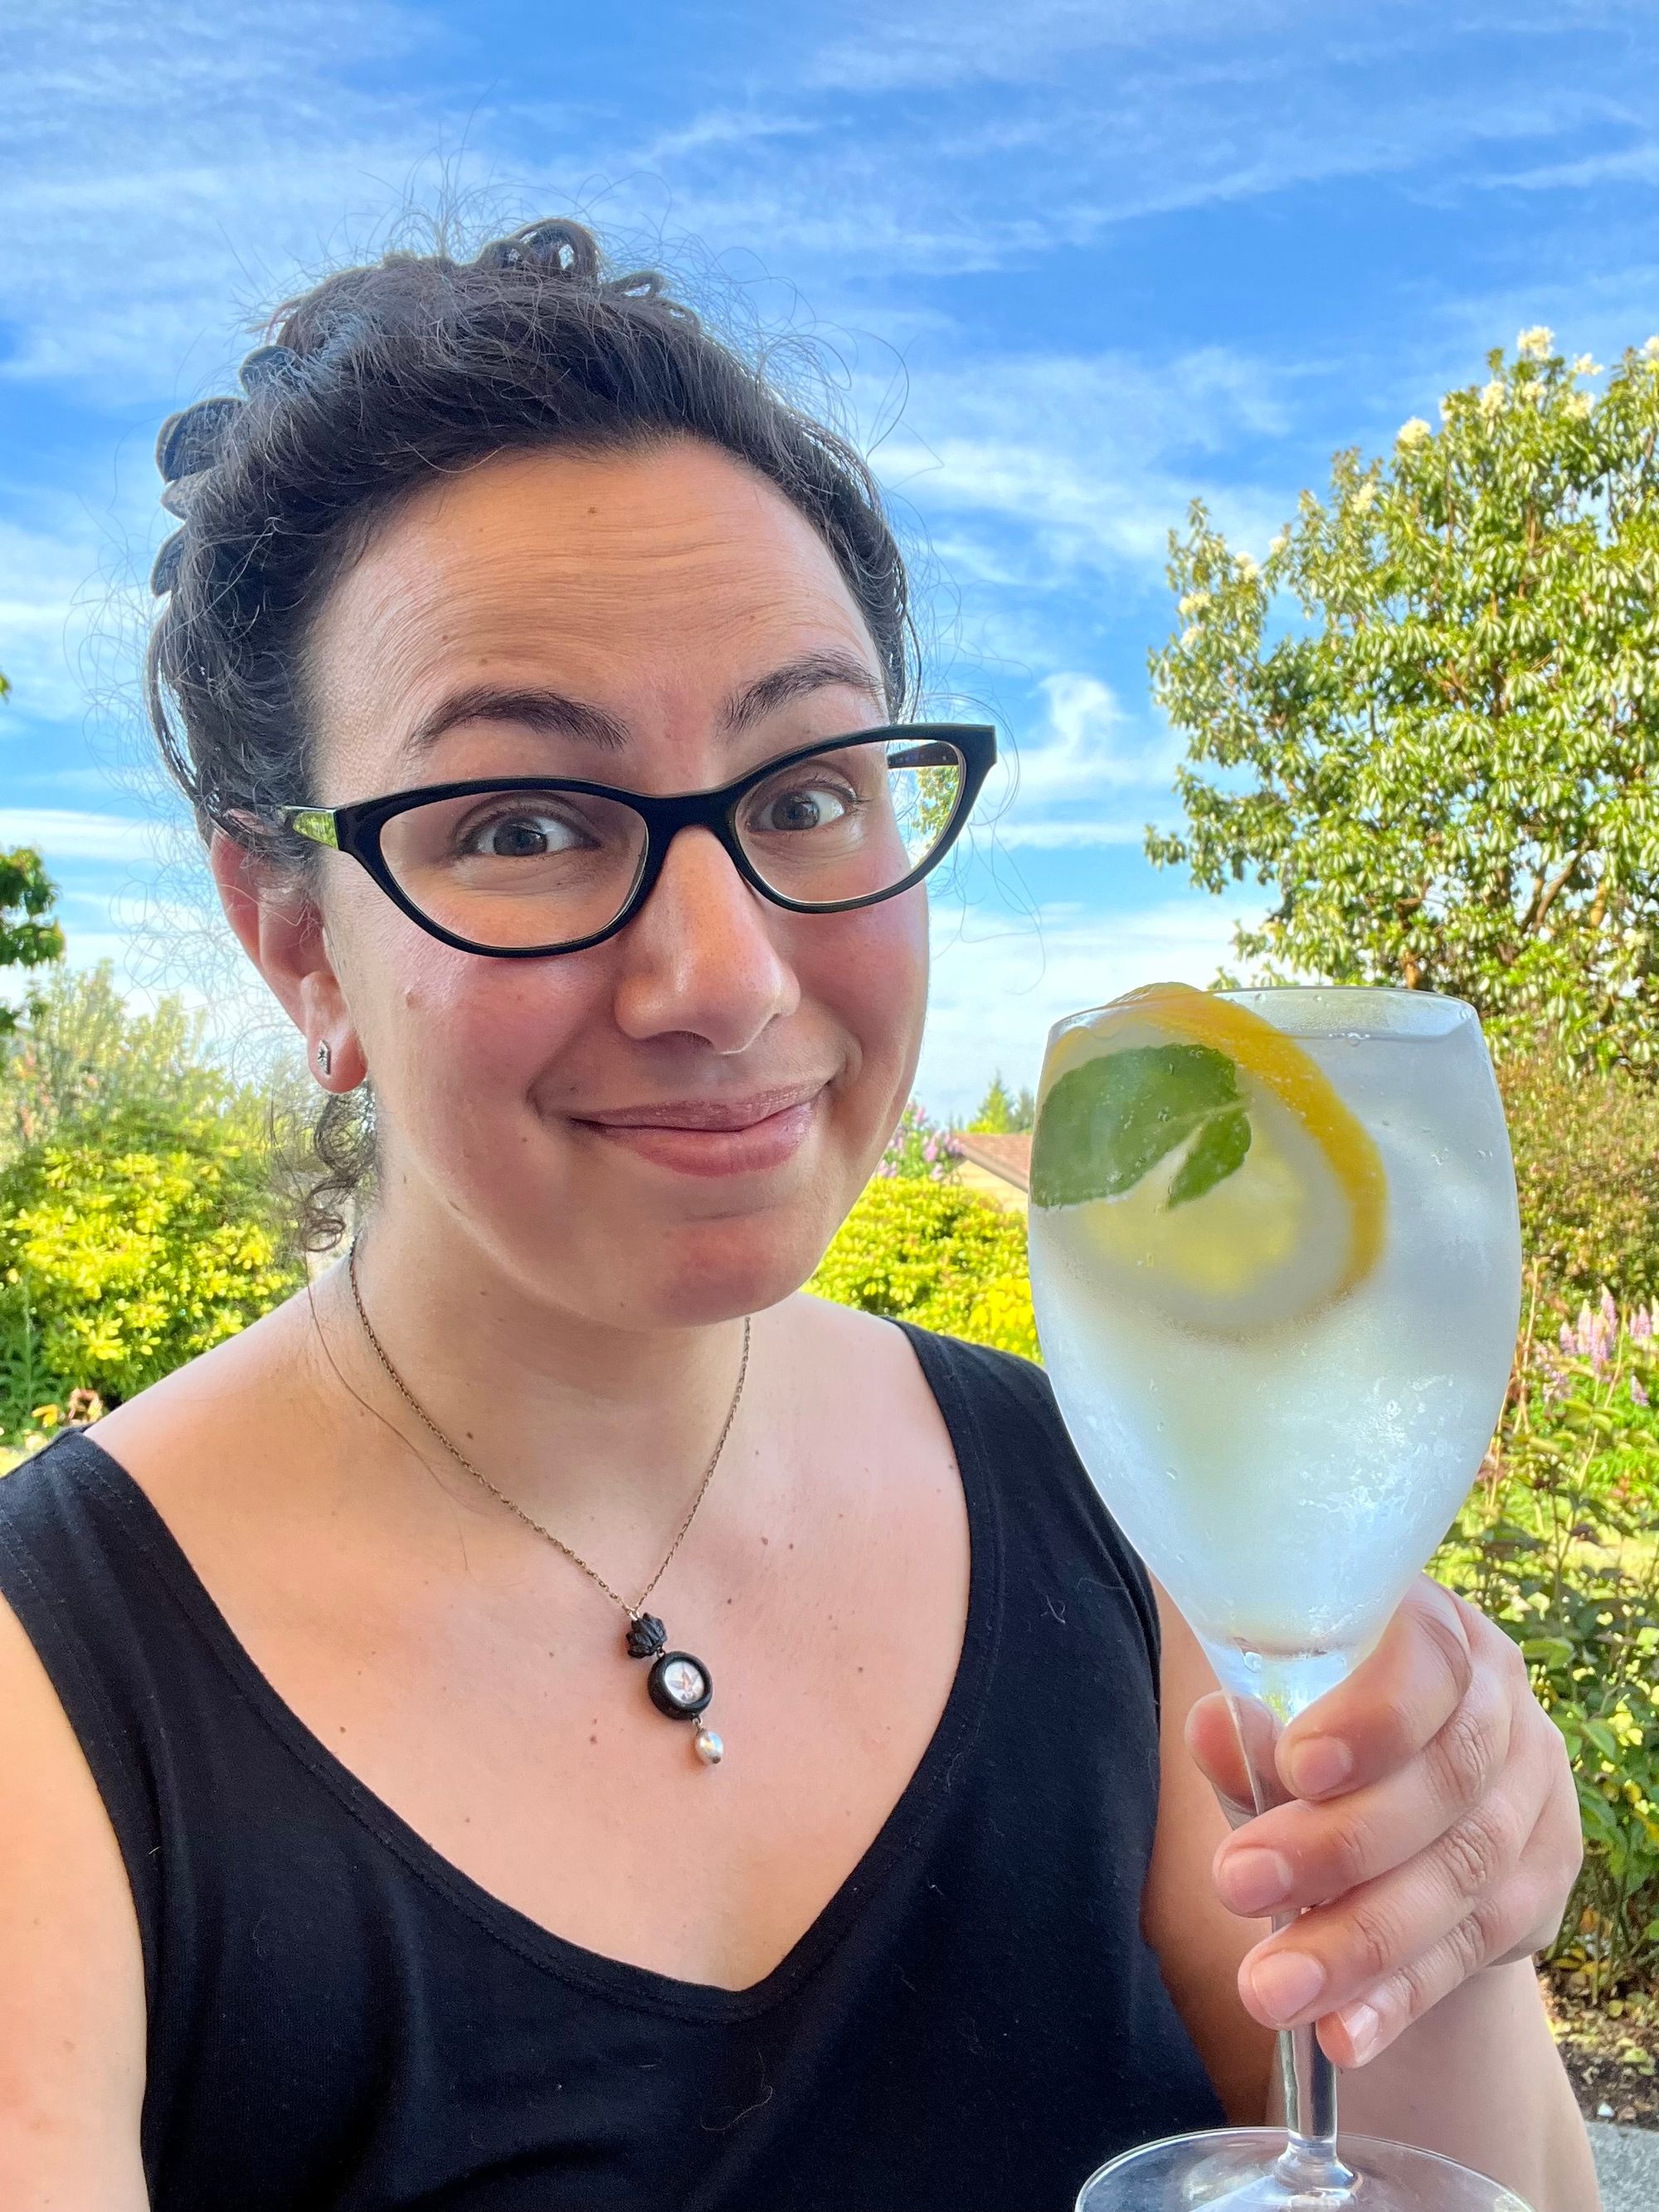 Selfie in which I look bemused but happy, in a brightly lit garden against a blue sky with white streaky clouds, holding up a wine glass full of gin and tonic with lemon and mint. 